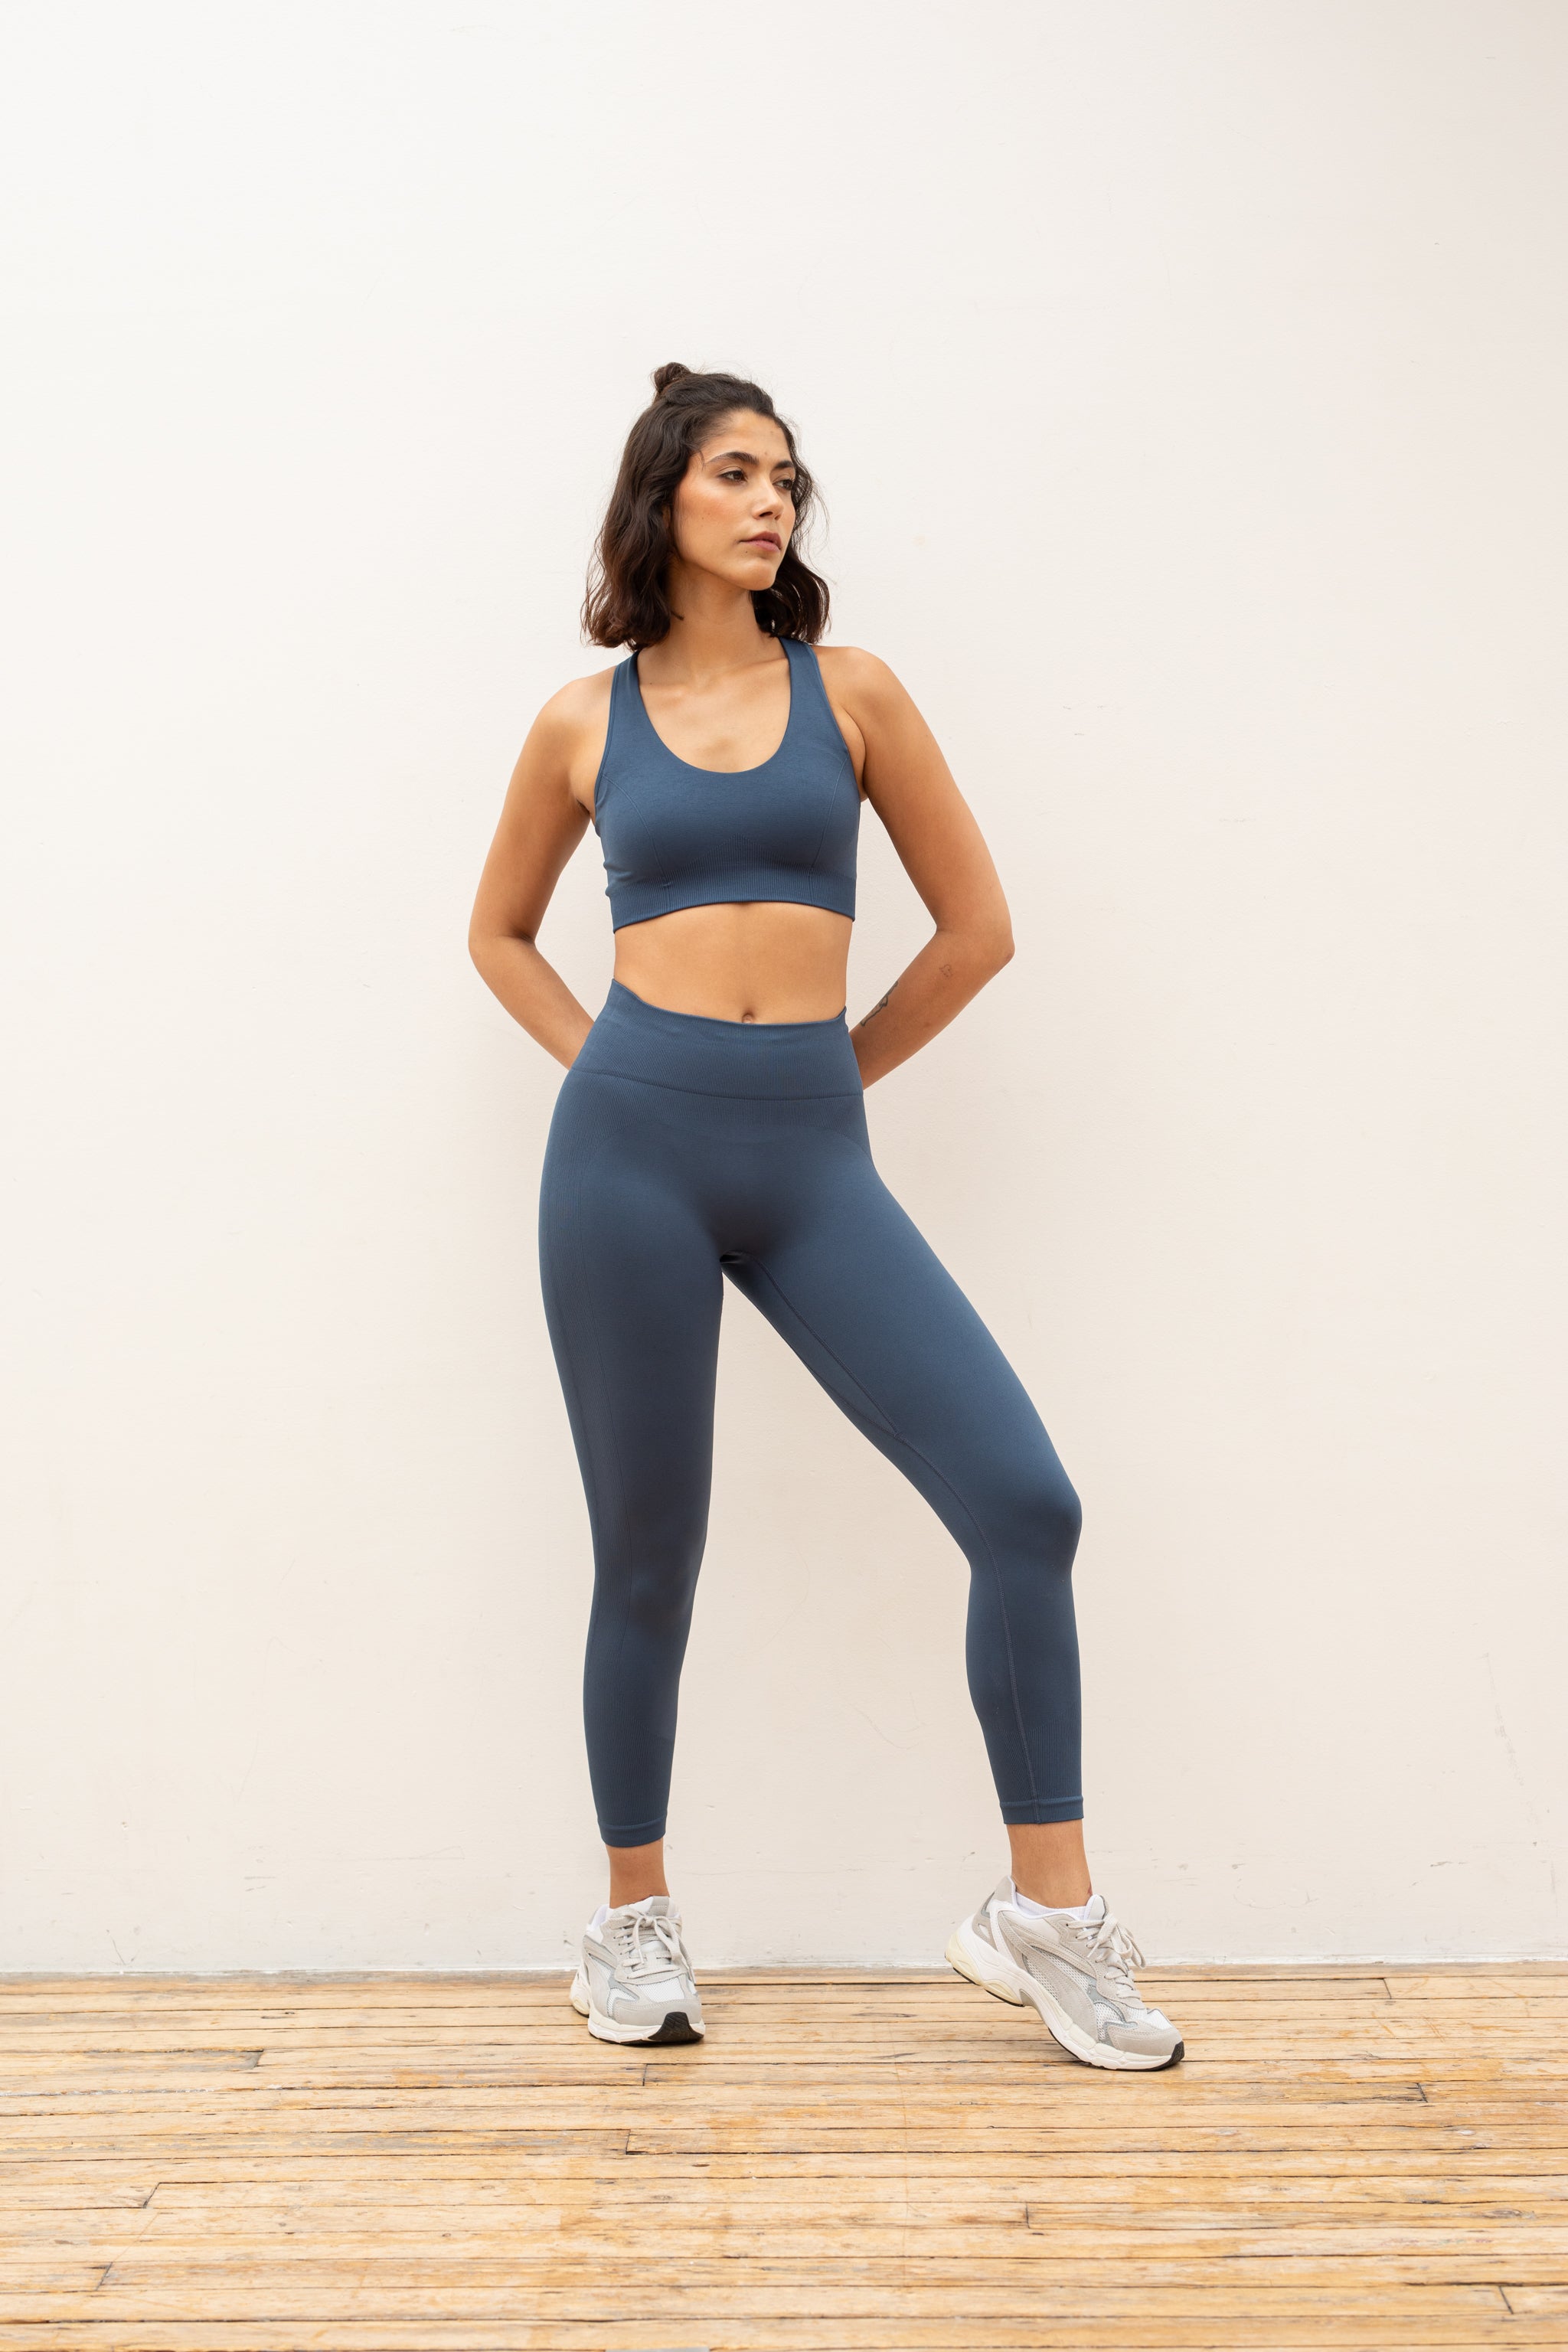 Blue recycled supportive sports bra and high waisted cropped leggings from sustainable women's activewear brand Jilla